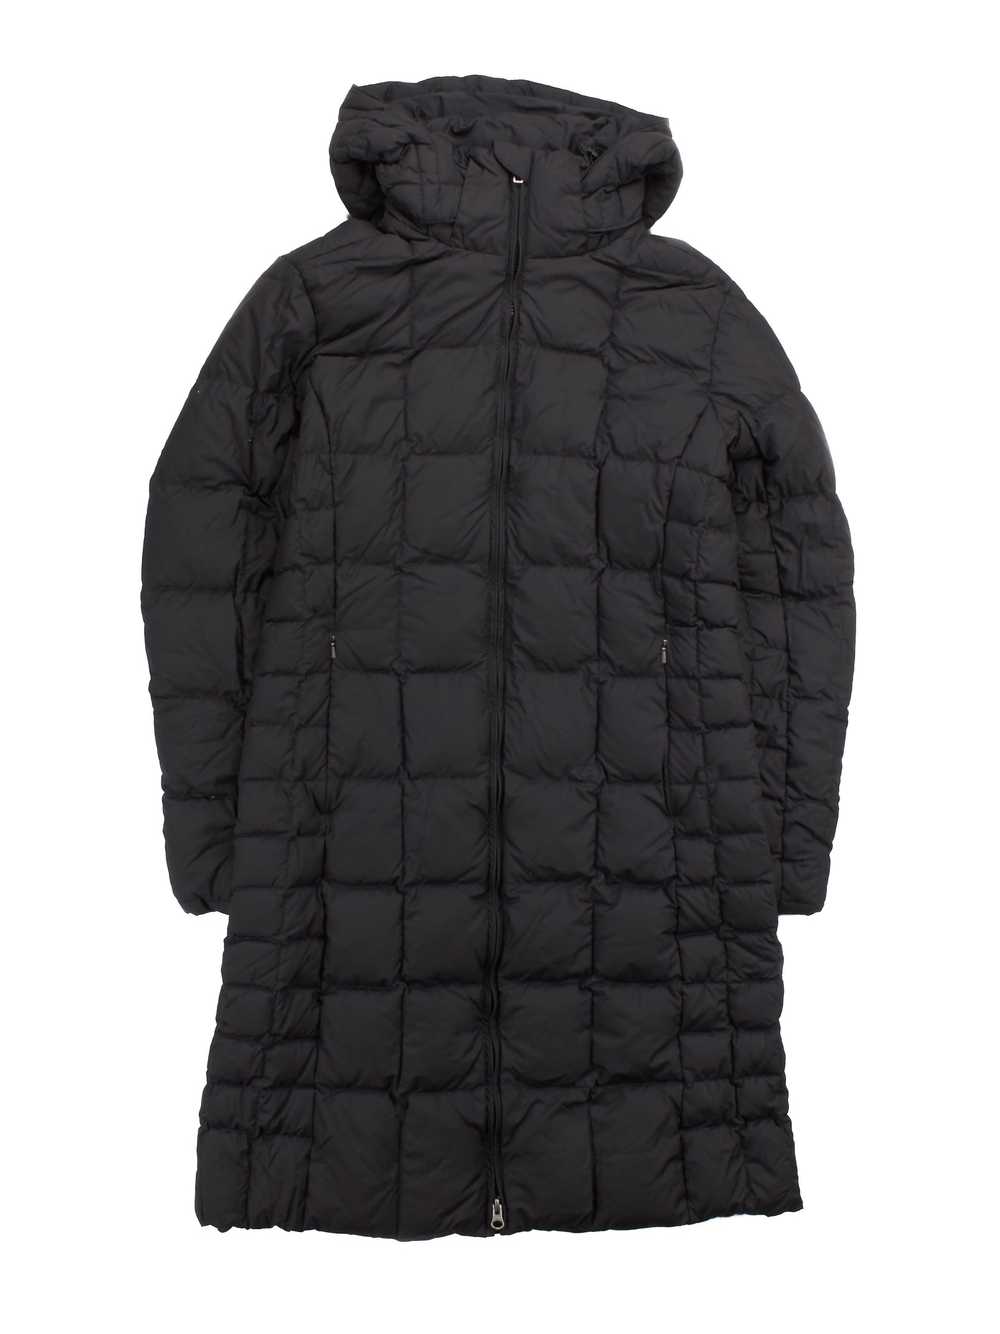 Patagonia - W's Down With it Parka - image 1